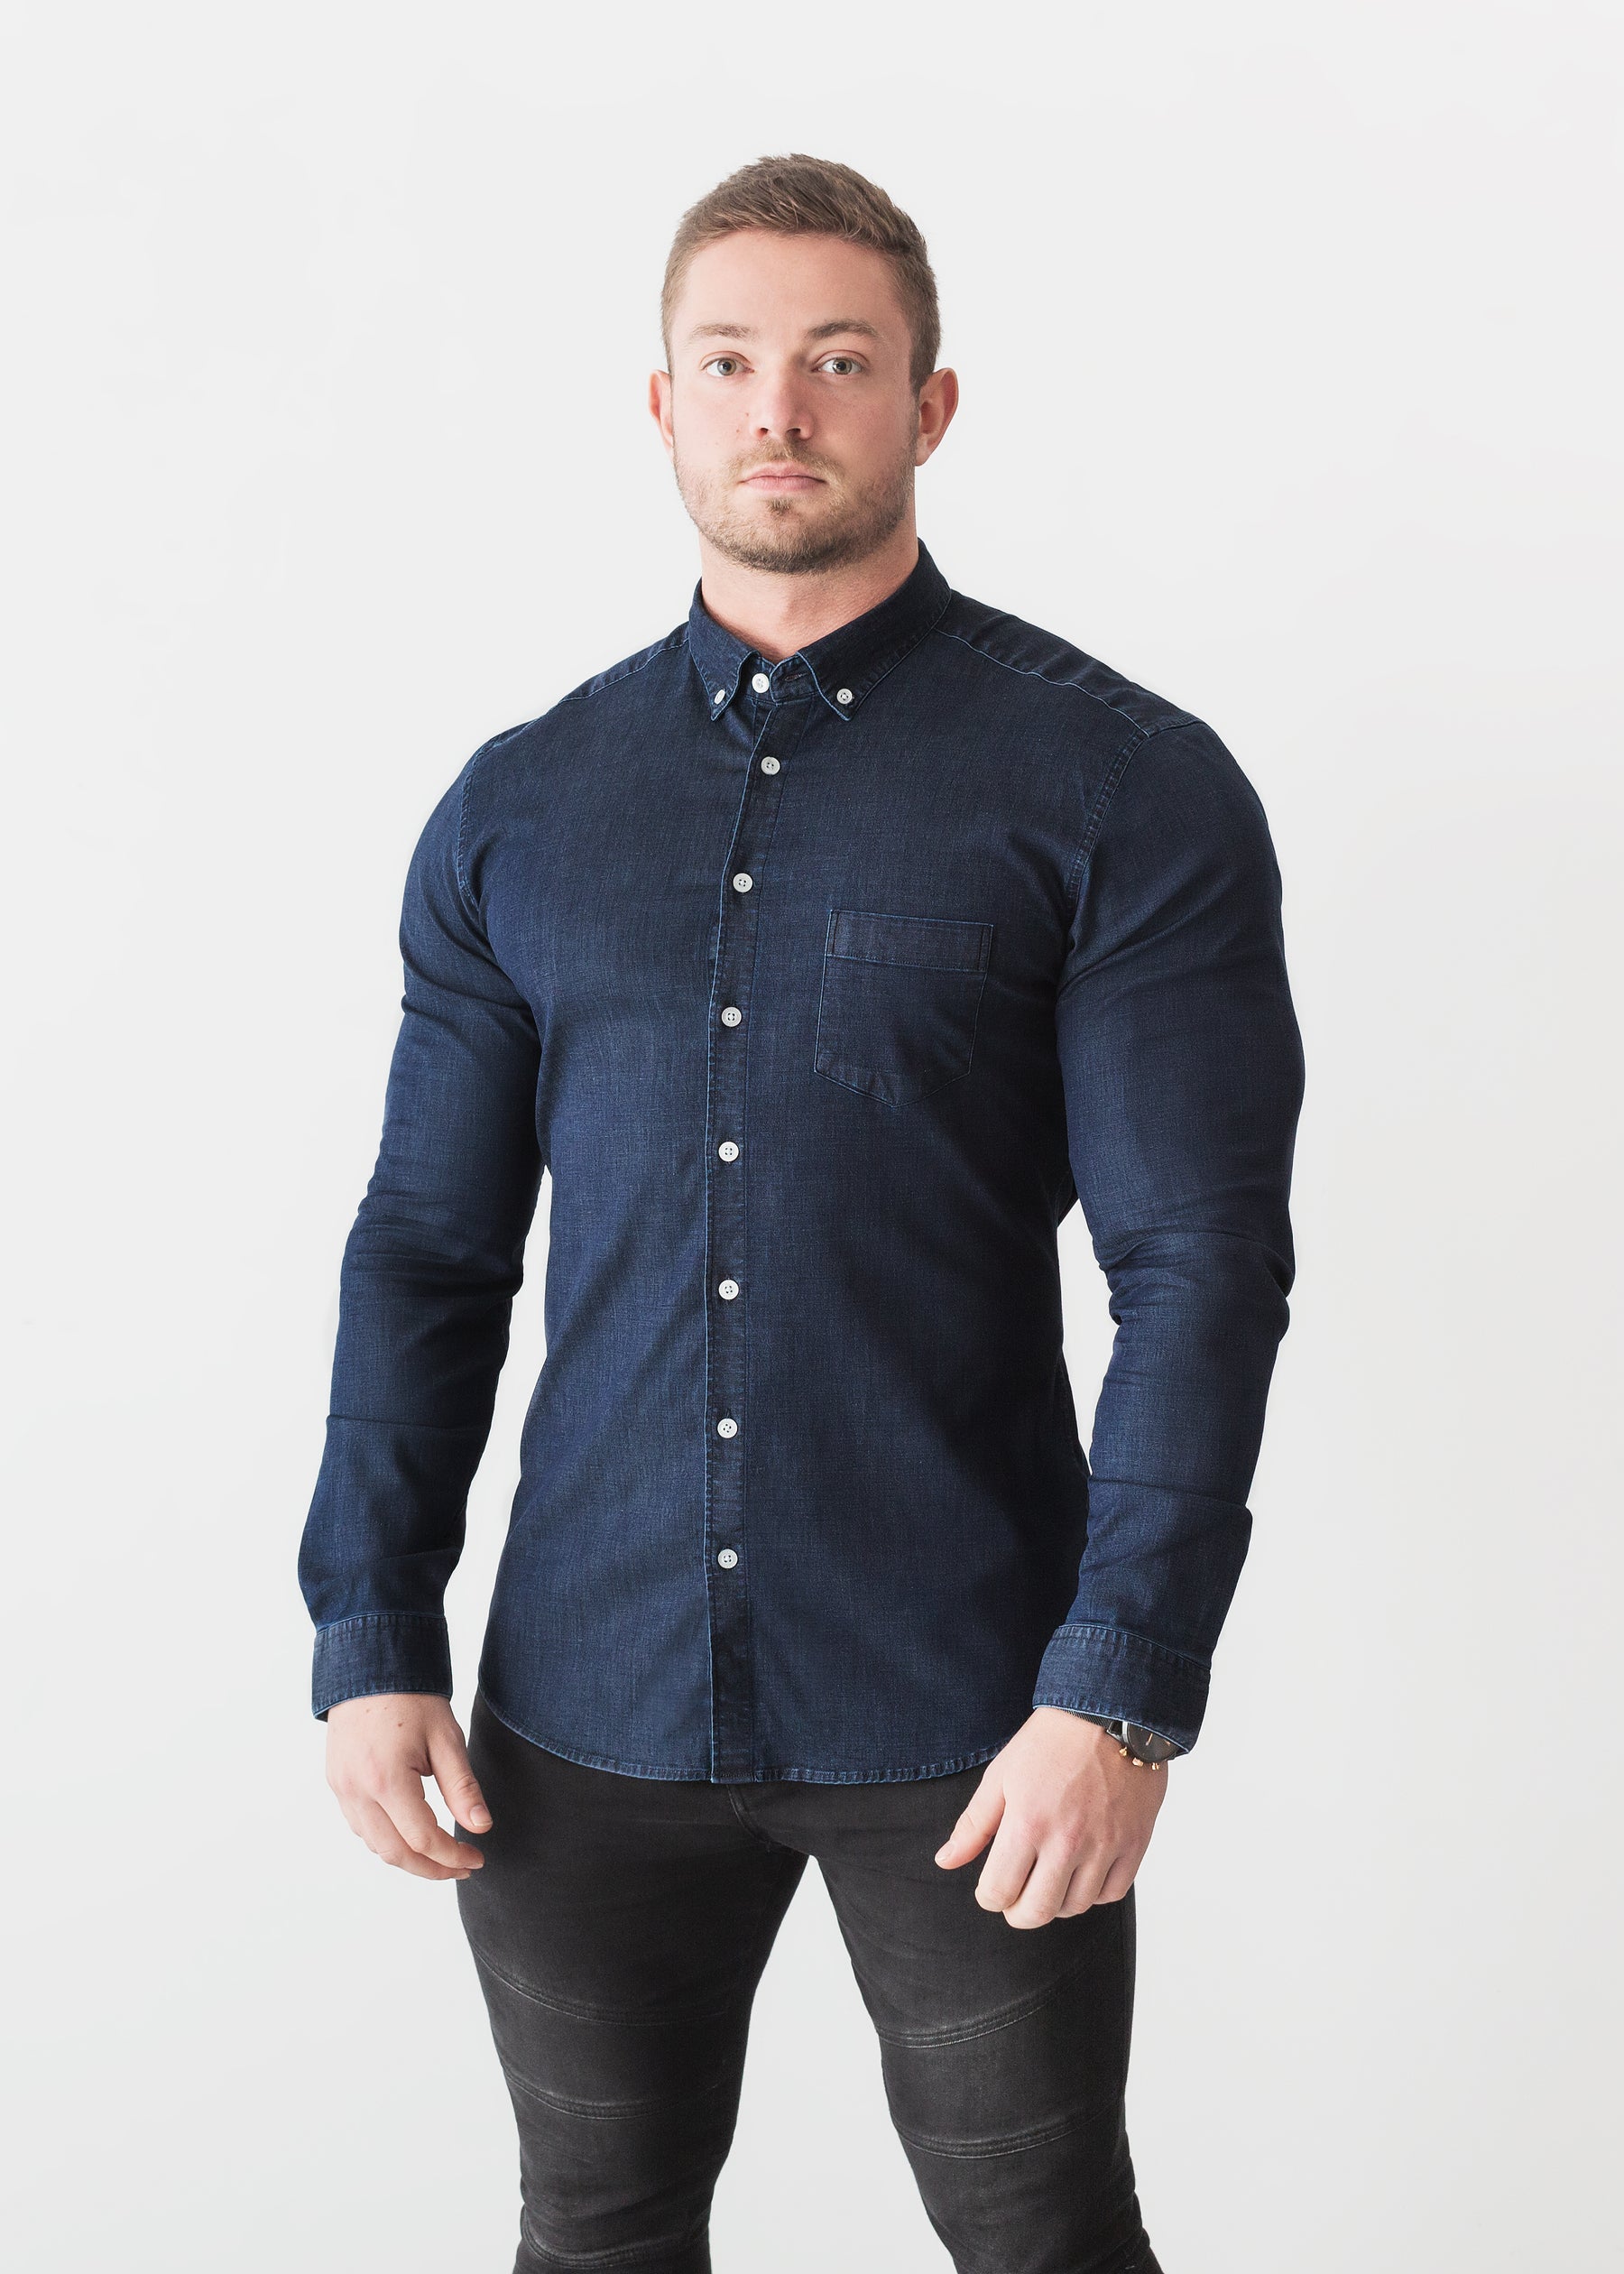 Navy Denim Tapered Fit Shirt - Buy Muscle Fit Denim Shirt | Tapered ...